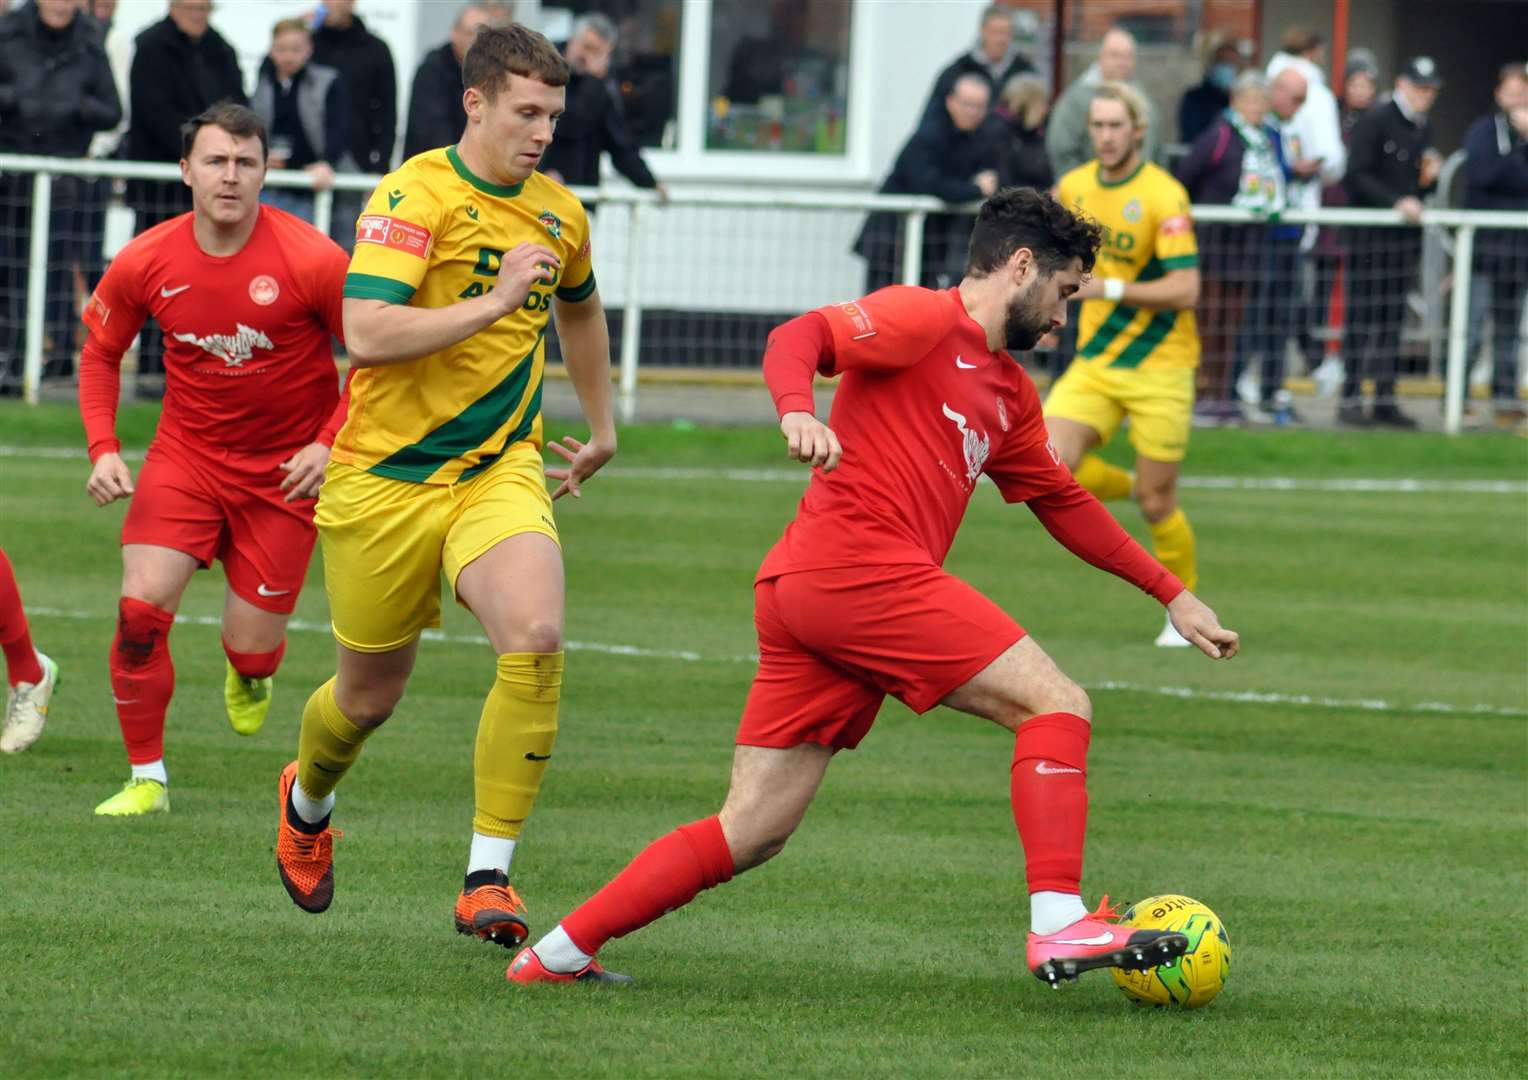 Hythe on the ball during their tie with Ashford on Saturday. Picture: Rudolph File (42755332)